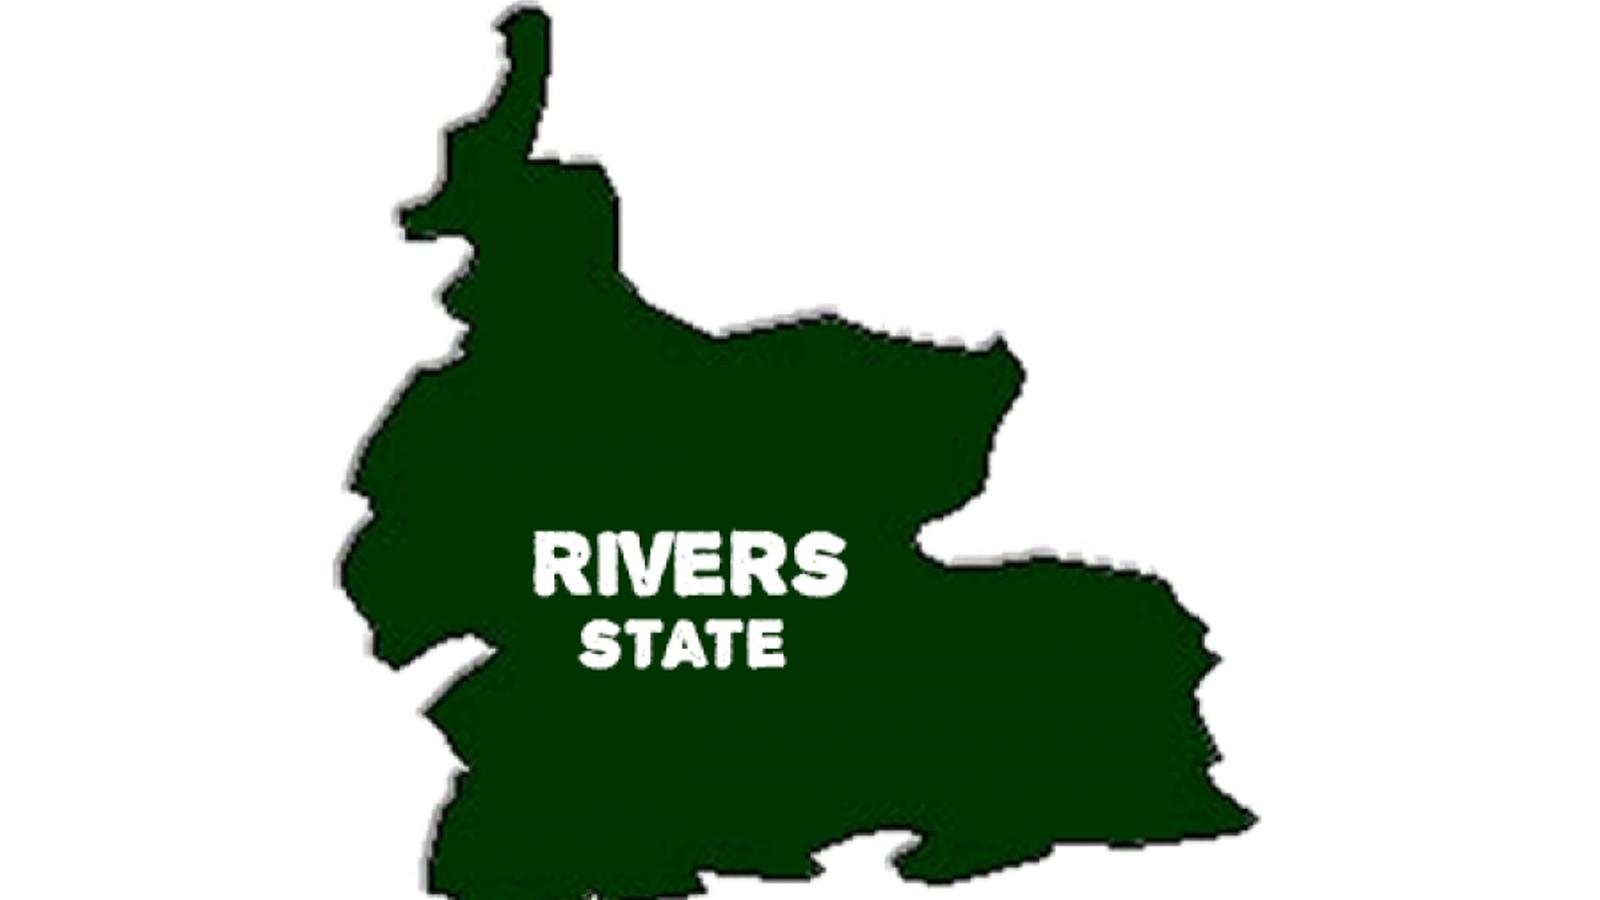 Rivers broadcast stations